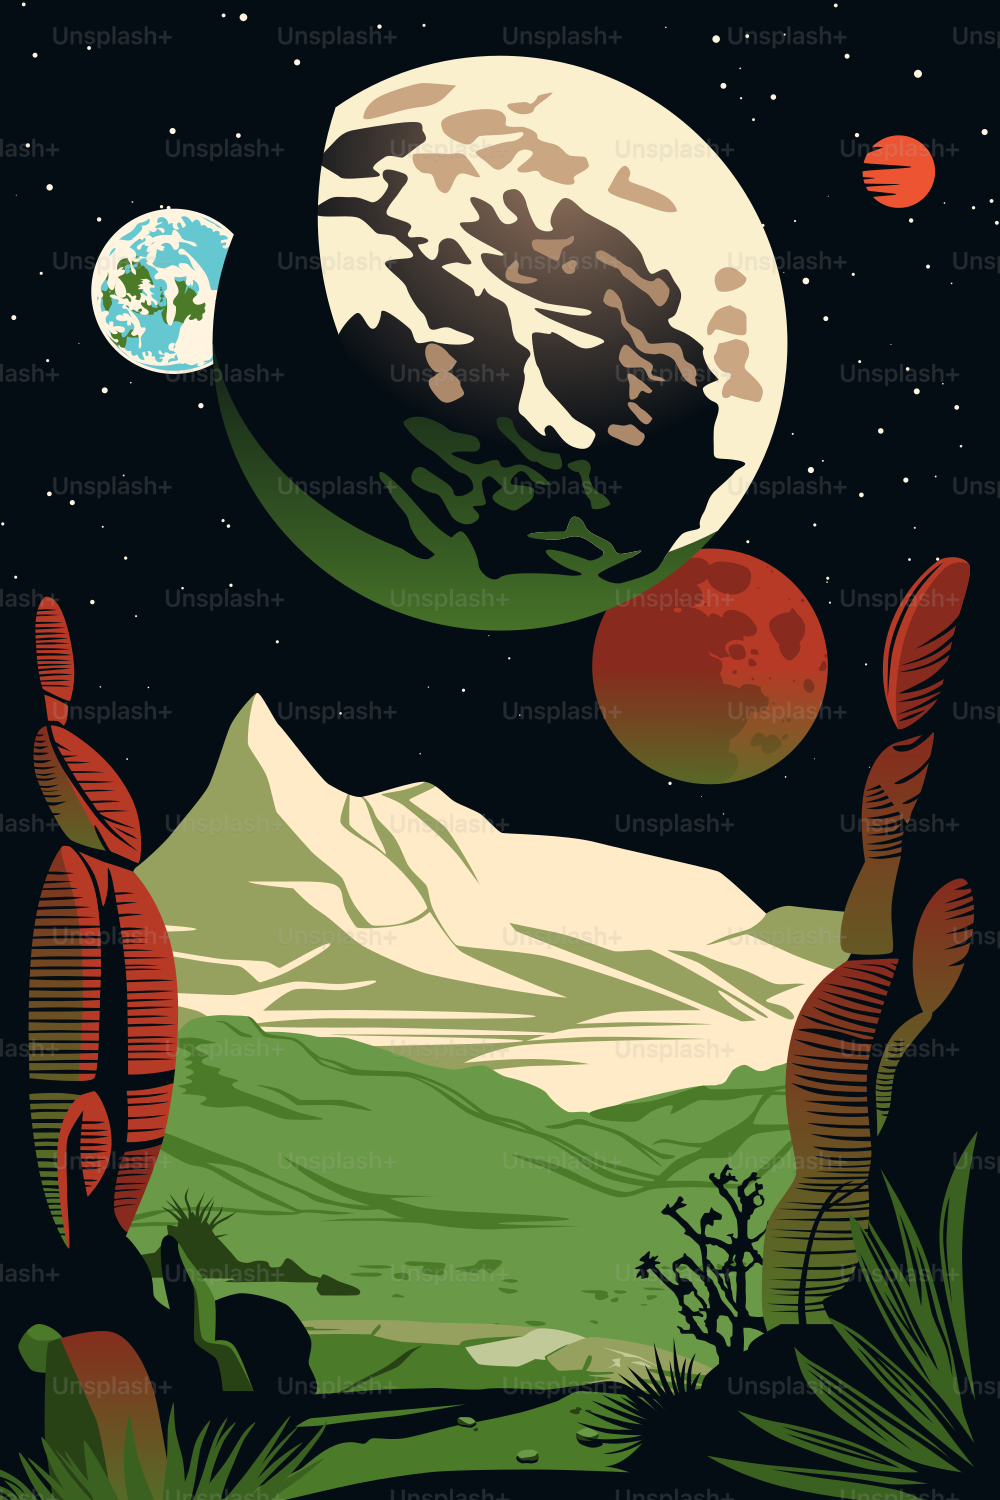 Space Poster.  Landscape of Distant Unfamiliar Green Planet Out There. Dark Skies with Moons and Asteroids. Stars of New Galaxies.